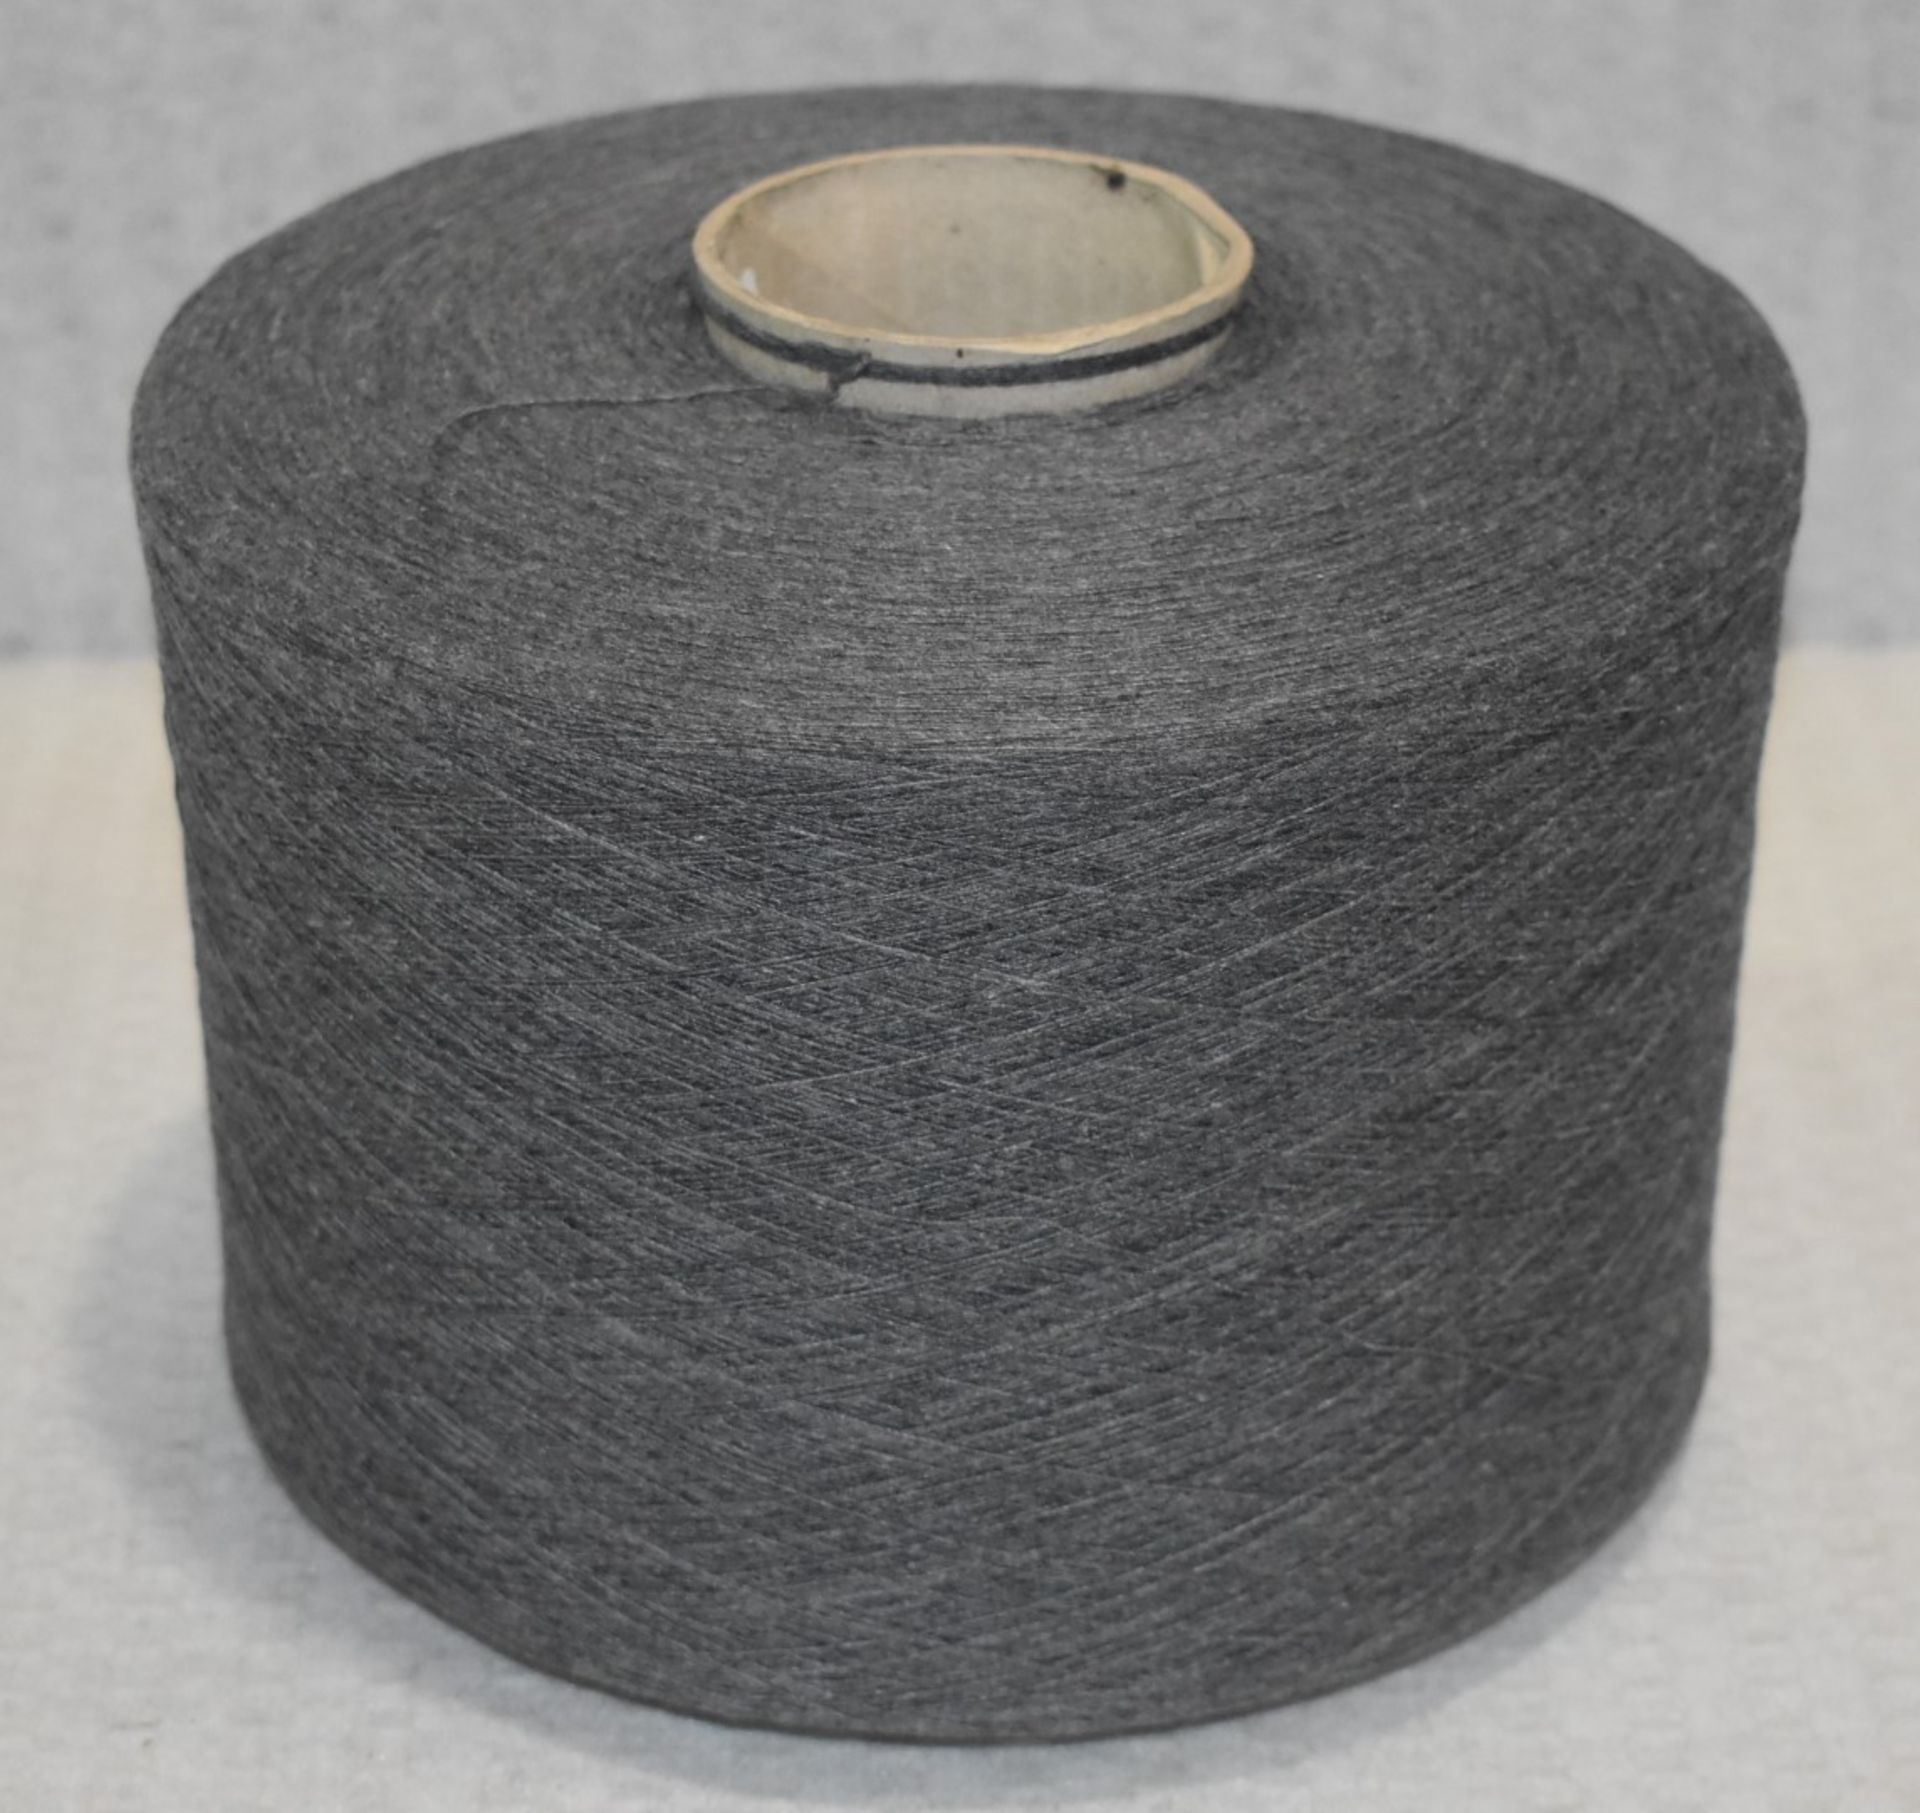 10 x Cones of 1/13 MicroCotton Knitting Yarn - Mid Grey - Approx Weight: 2,500g - New Stock ABL Yarn - Image 7 of 10